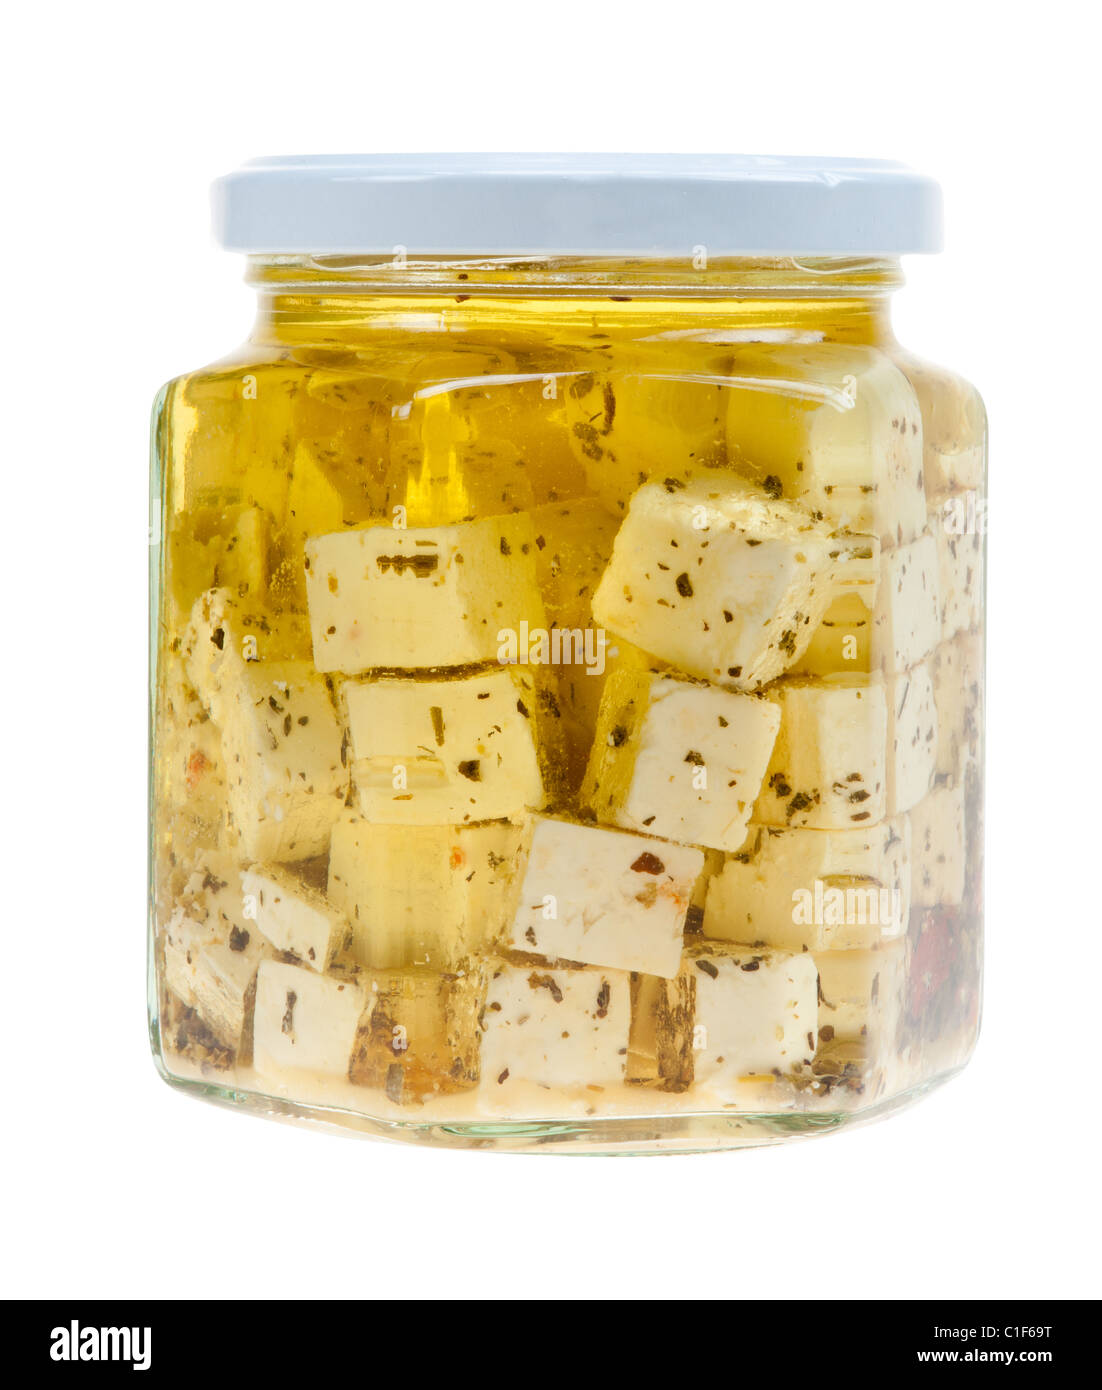 Hirtenkase or herder's cheese with oil in a jar isolated on a white background Stock Photo